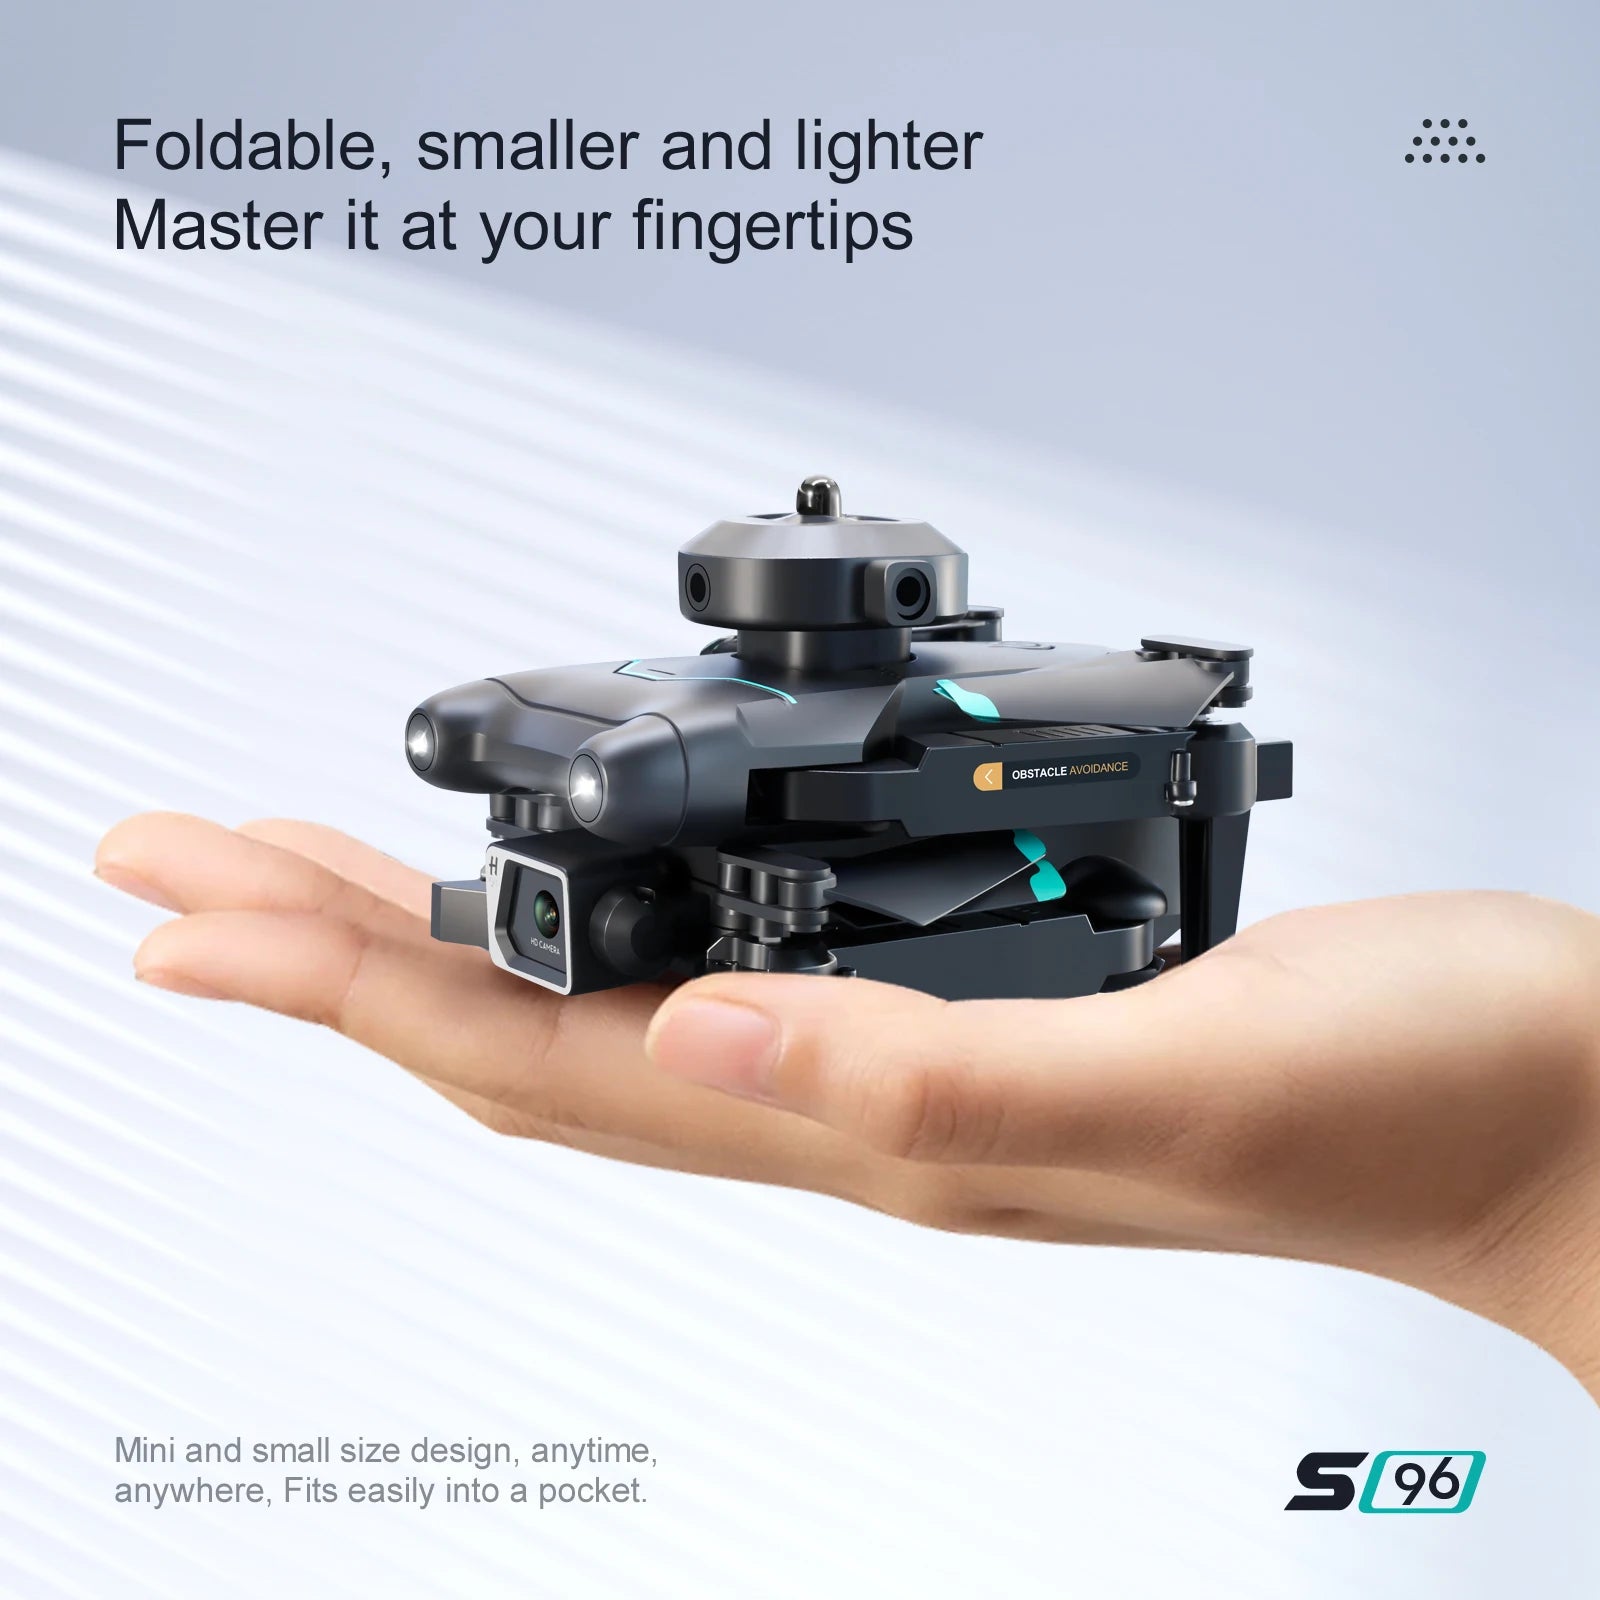 S96 Mini Drone, foldable, smaller and lighter master it at your fingertips obstacle avoidance